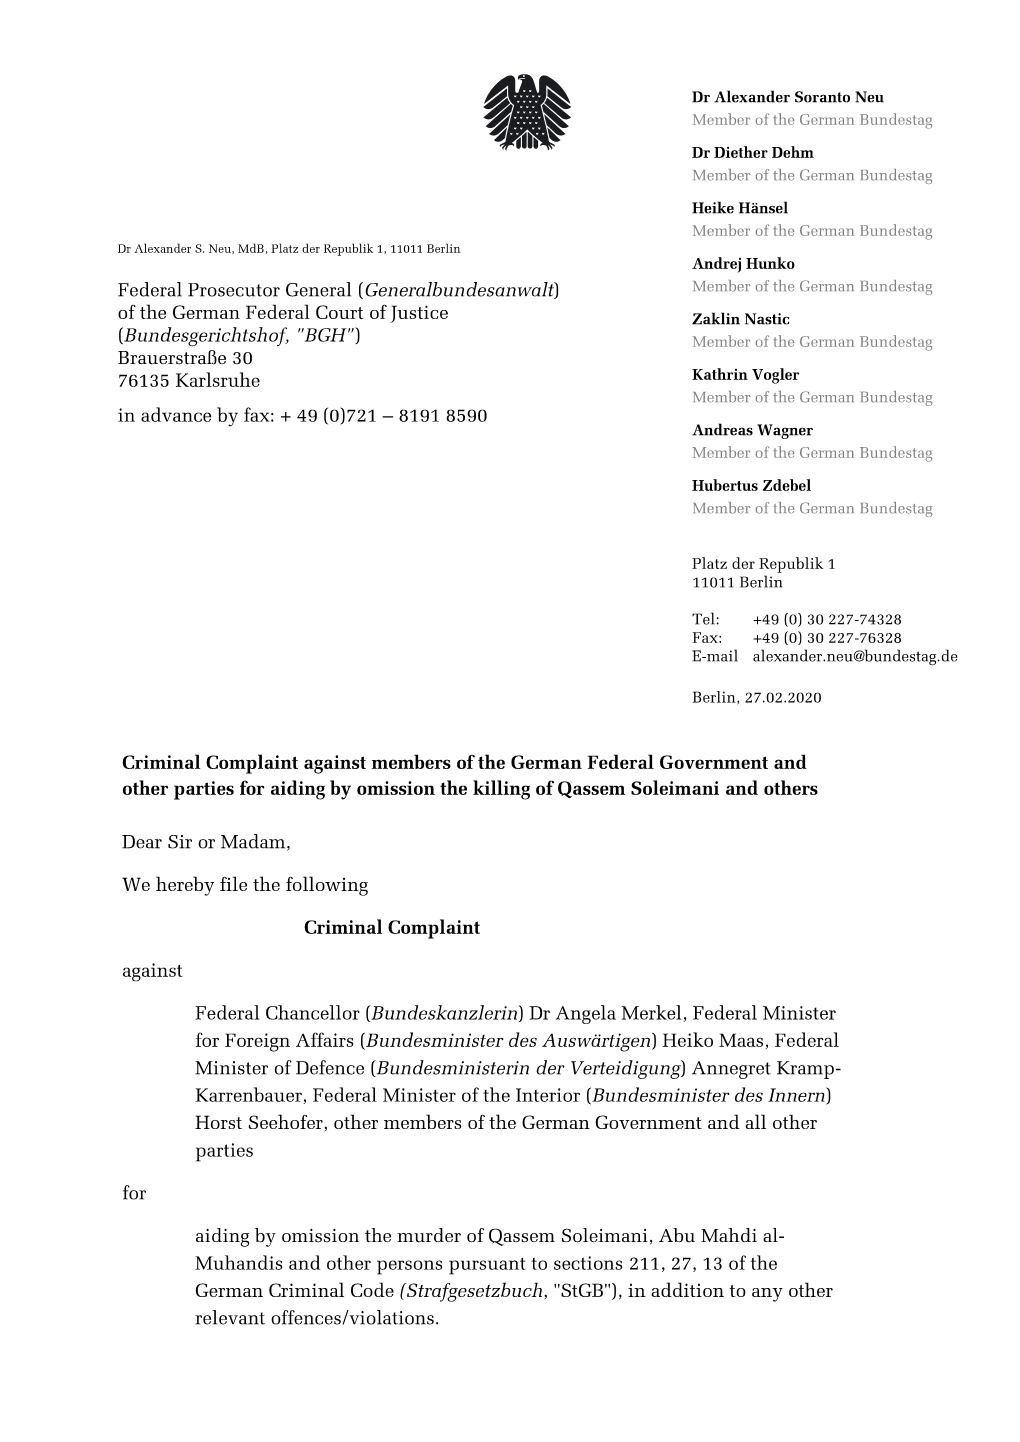 Criminal Complaint Against Members of the German Federal Government and Other Parties for Aiding by Omission the Killing of Qassem Soleimani and Others